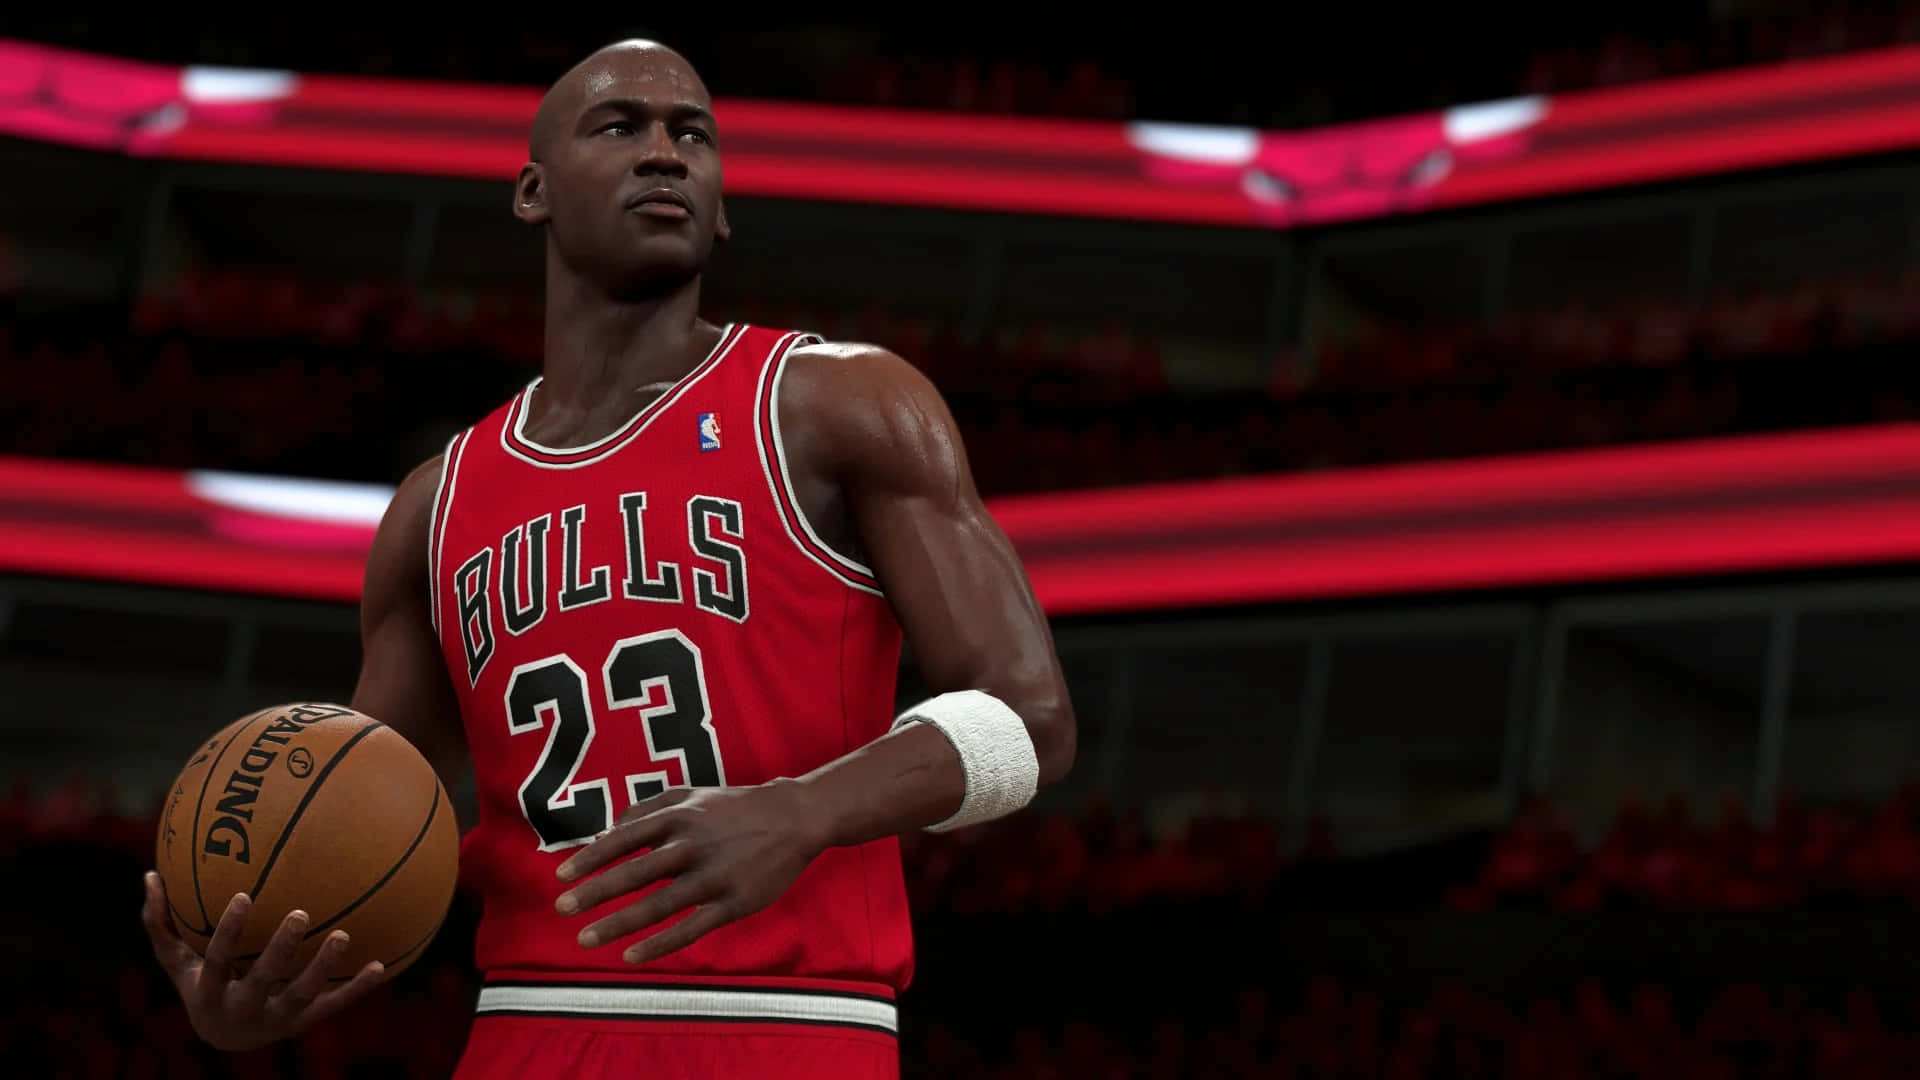 Experience The World Of Nba 2k With Realistic, Lifelike Gameplay